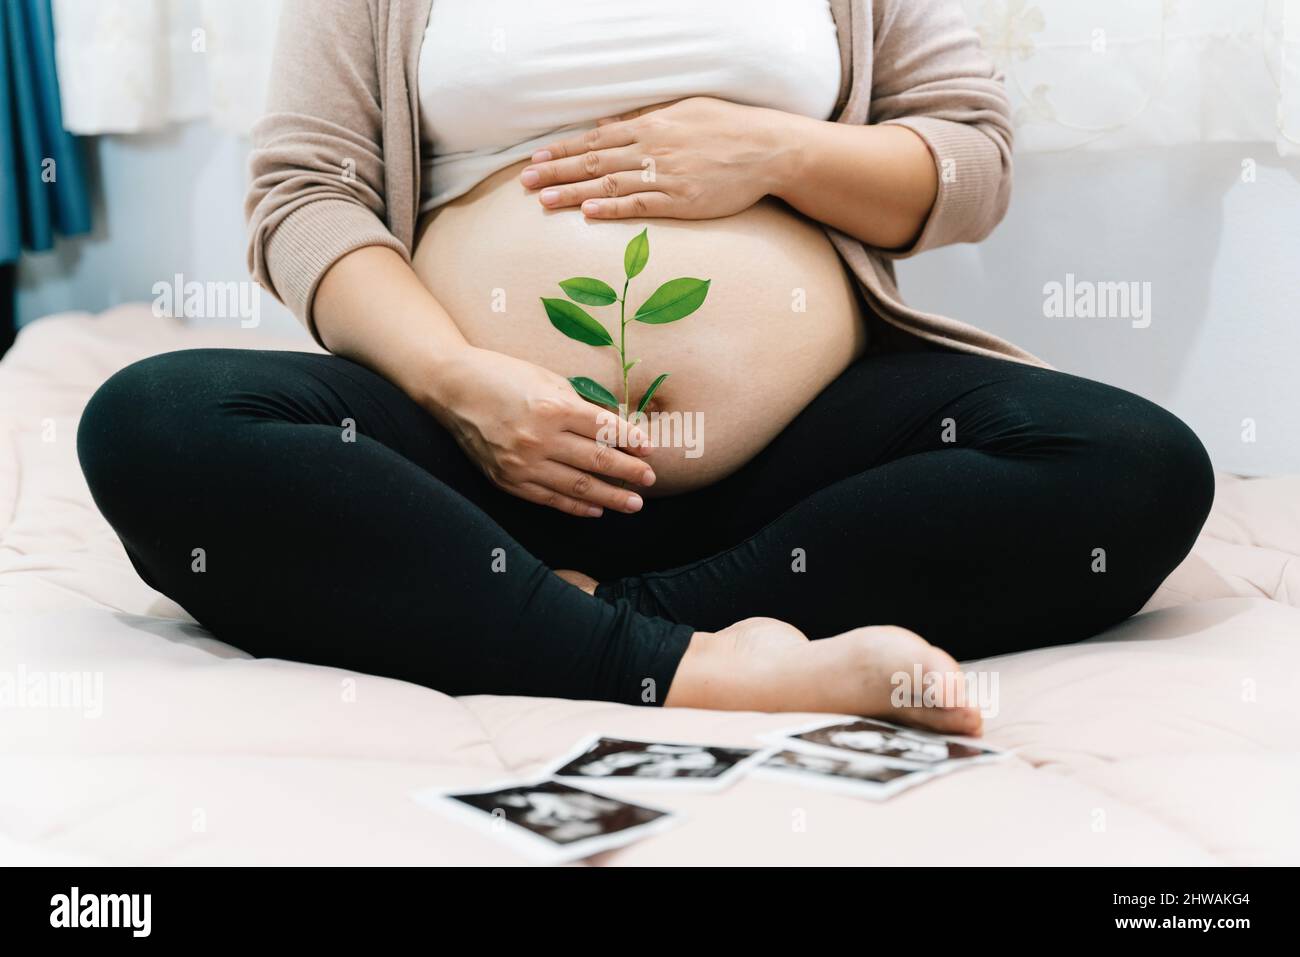 A Pregnant woman holds green sprout plant near her belly as symbol of new life, Mother, wellbeing, fertility, unborn baby health. Concept pregnancy, m Stock Photo